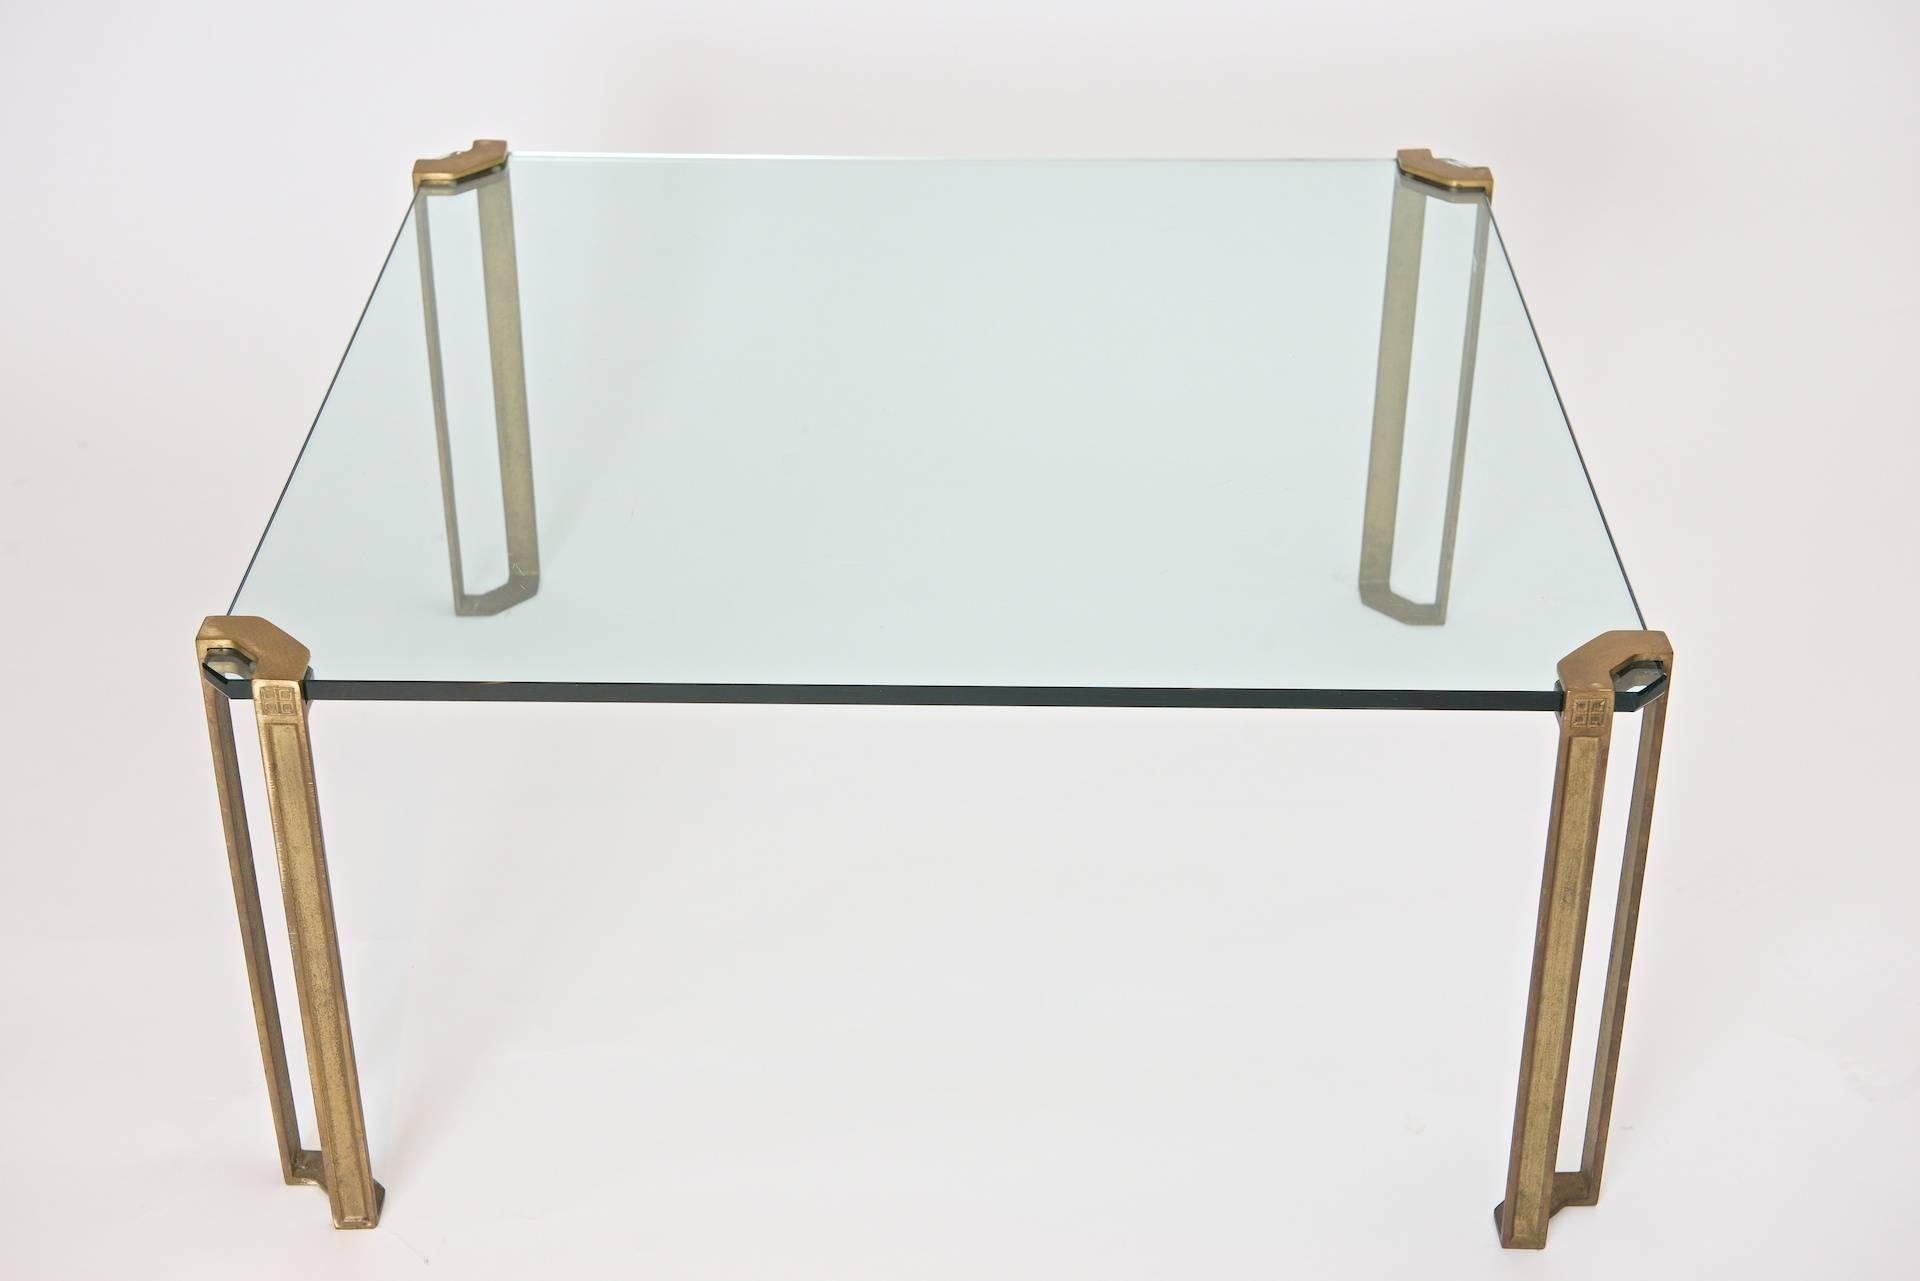 'Frameless' coffee table; glass clamped by four brass 'legs'.

Minimal and innovative table design by Peter Ghyczy.